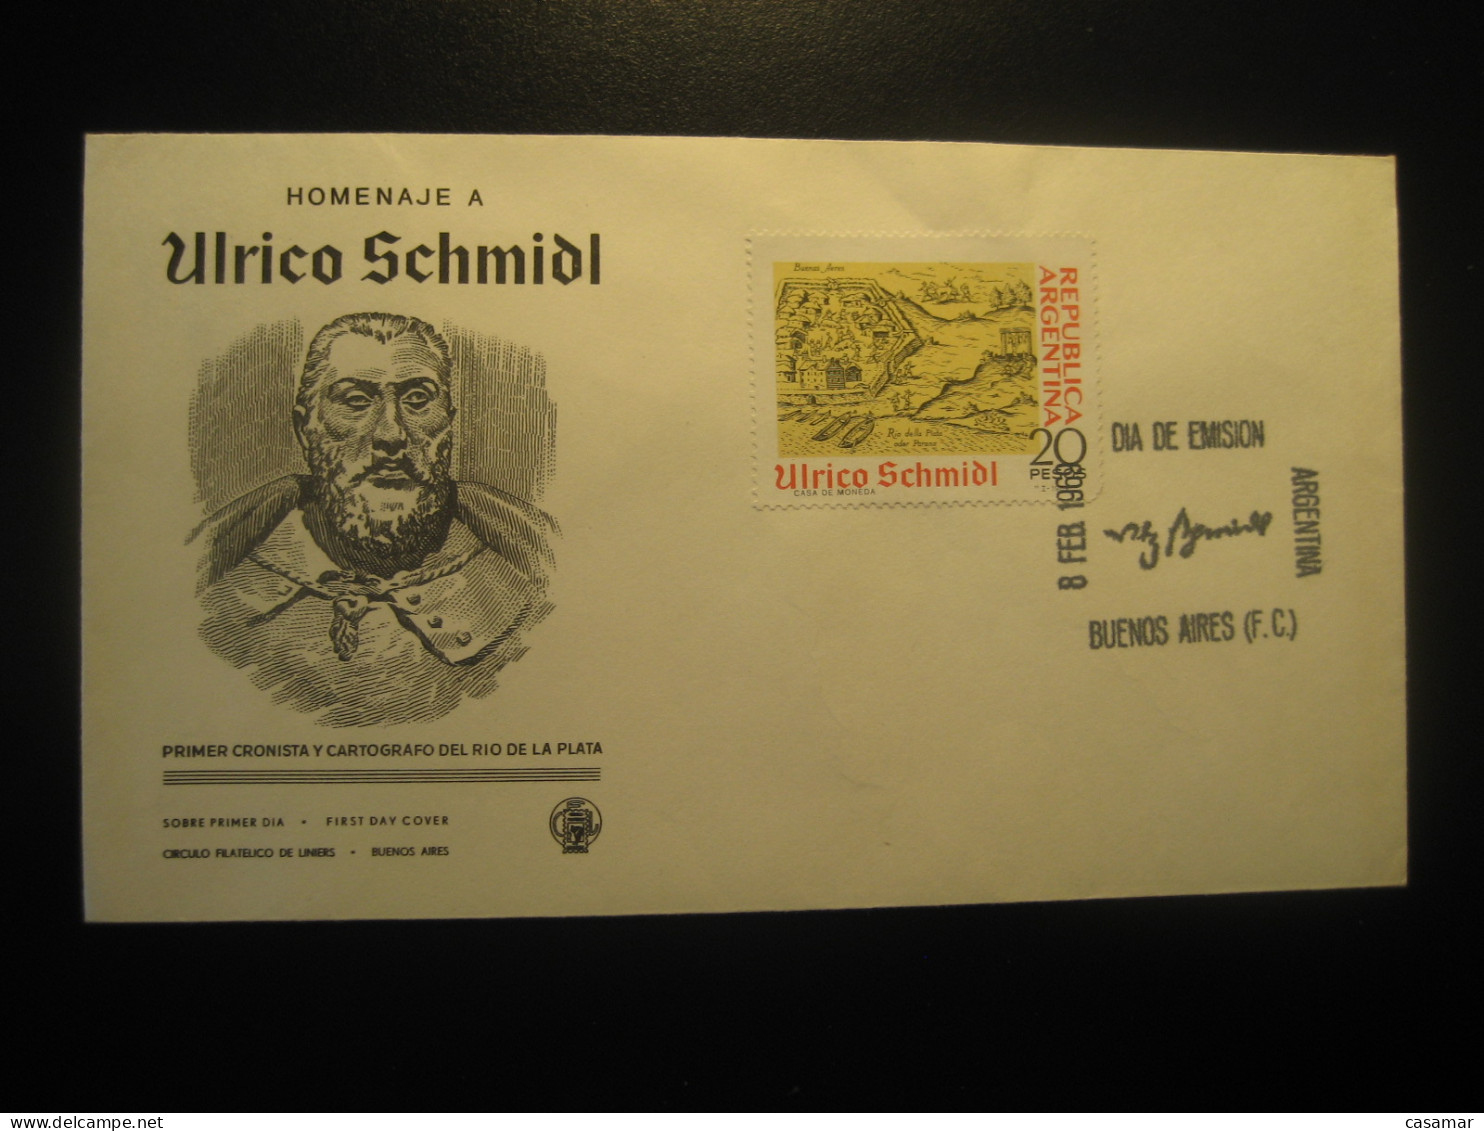 1969 Ulrico Schmidl Cartografo Cartography Cartographie Mapping Geography FDC Cancel Cover ARGENTINA Buenos Aires - Geografia